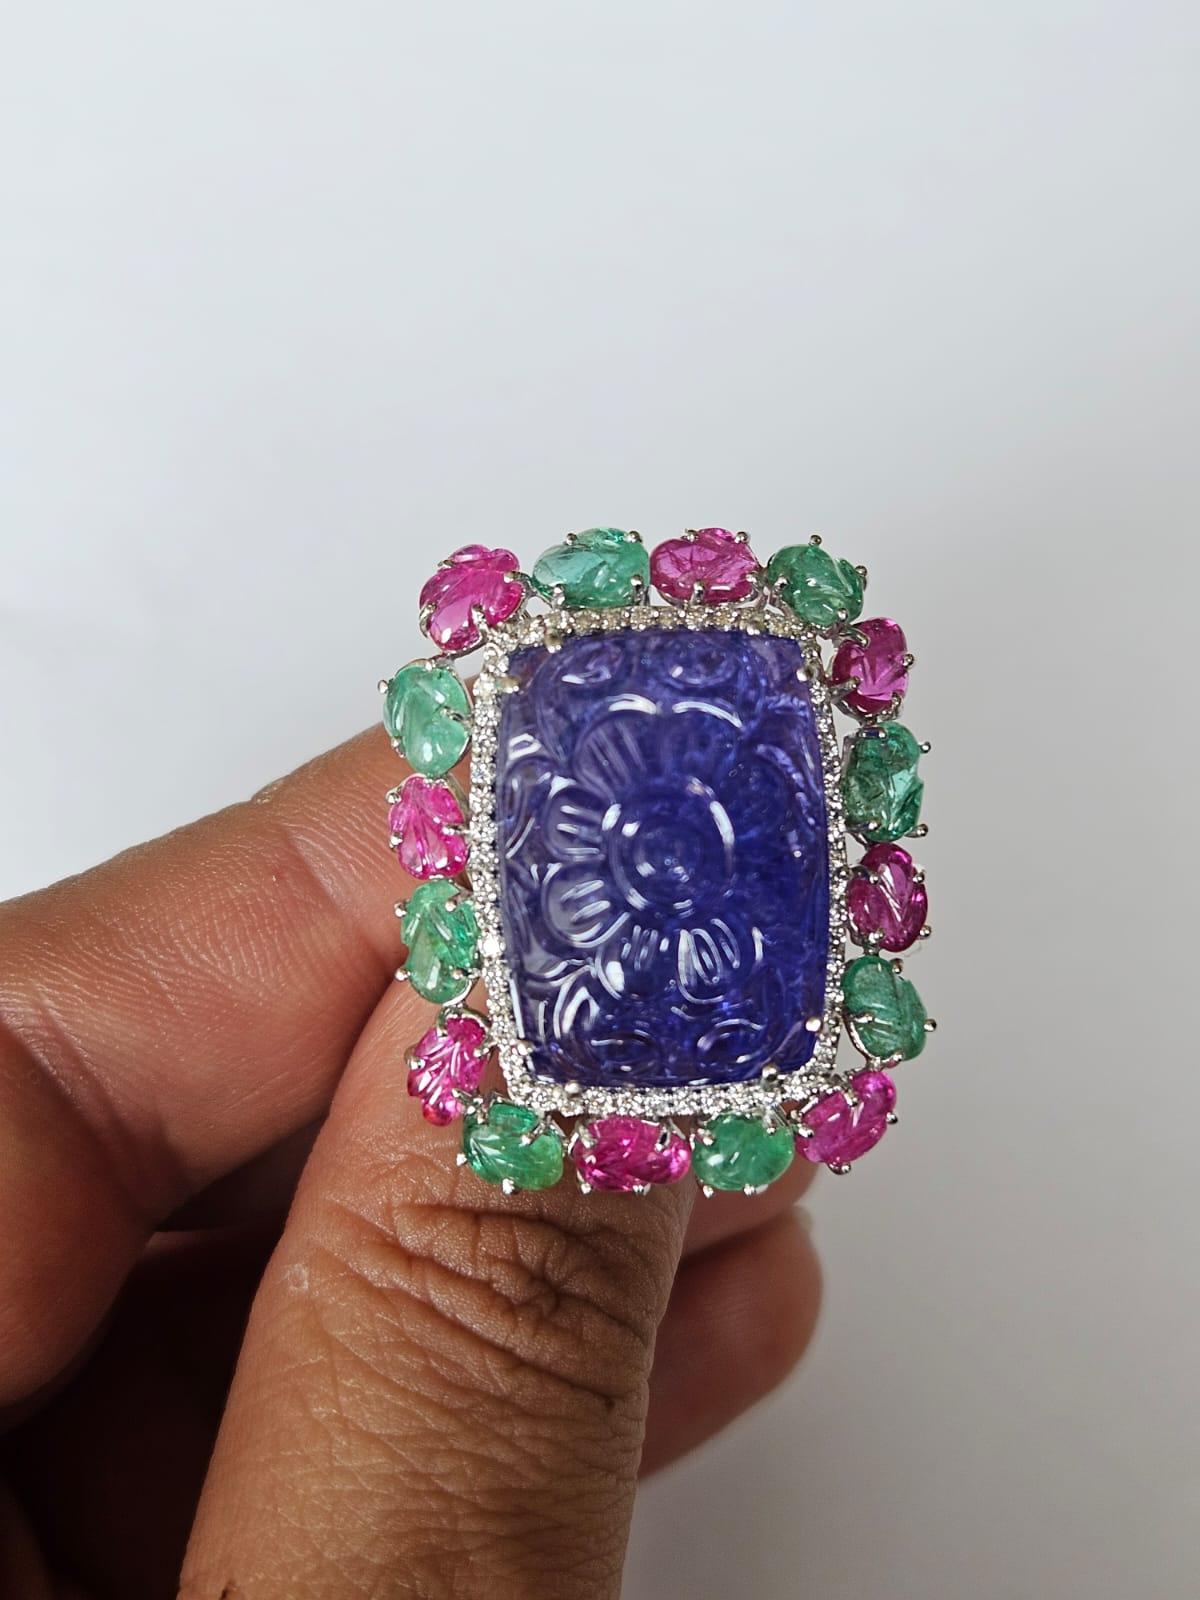 A very gorgeous and beautiful, Art Deco style, Emerald, Ruby & Tanzanite Tutti Frutti Cocktail Ring set in 18K White Gold. The weight of the carved Tanzanite is 28.28 carats. The Tanzanite is responsibly sourced from Tanzania & is expertly